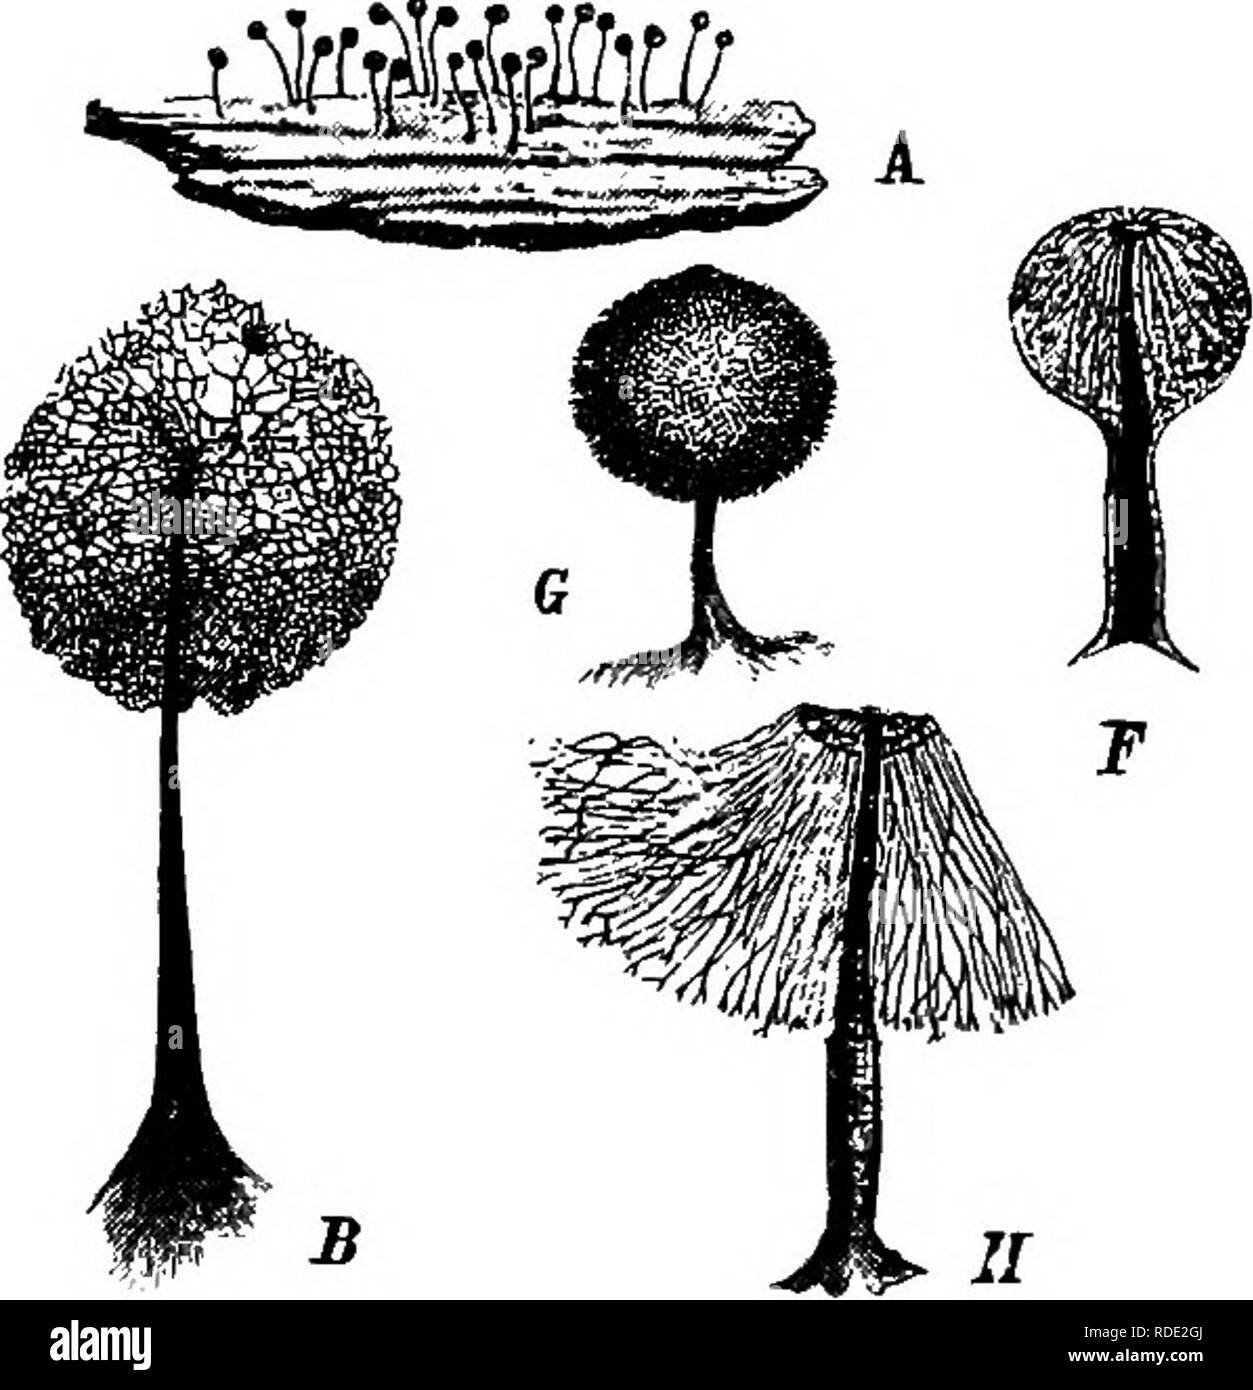 . A text-book of mycology and plant pathology . Plant diseases; Fungi in agriculture; Plant diseases; Fungi. Fig. 2.—A,B, Comalricha nigra. A, Sporangium, natural size; B, capillitium, 20/1; C, £, Stemonitis fusca; C, sporangium, natural size; D and E, capillitia, 5/1, 20/1; F, H, JLnerlhema papillatum, F, unripe; G, mature sporangium, lo/i; H, capil- litium, 20/1. (C D, after nature. A, F, G, H, after Roslafinski; B, E, after de Bary in Die natiirlichen PJlanzenfamilien I. i, p. 26.) by the presence of the vacuoles. The splitting up of the irregular blocks of protoplasm, which have the nuclei Stock Photo